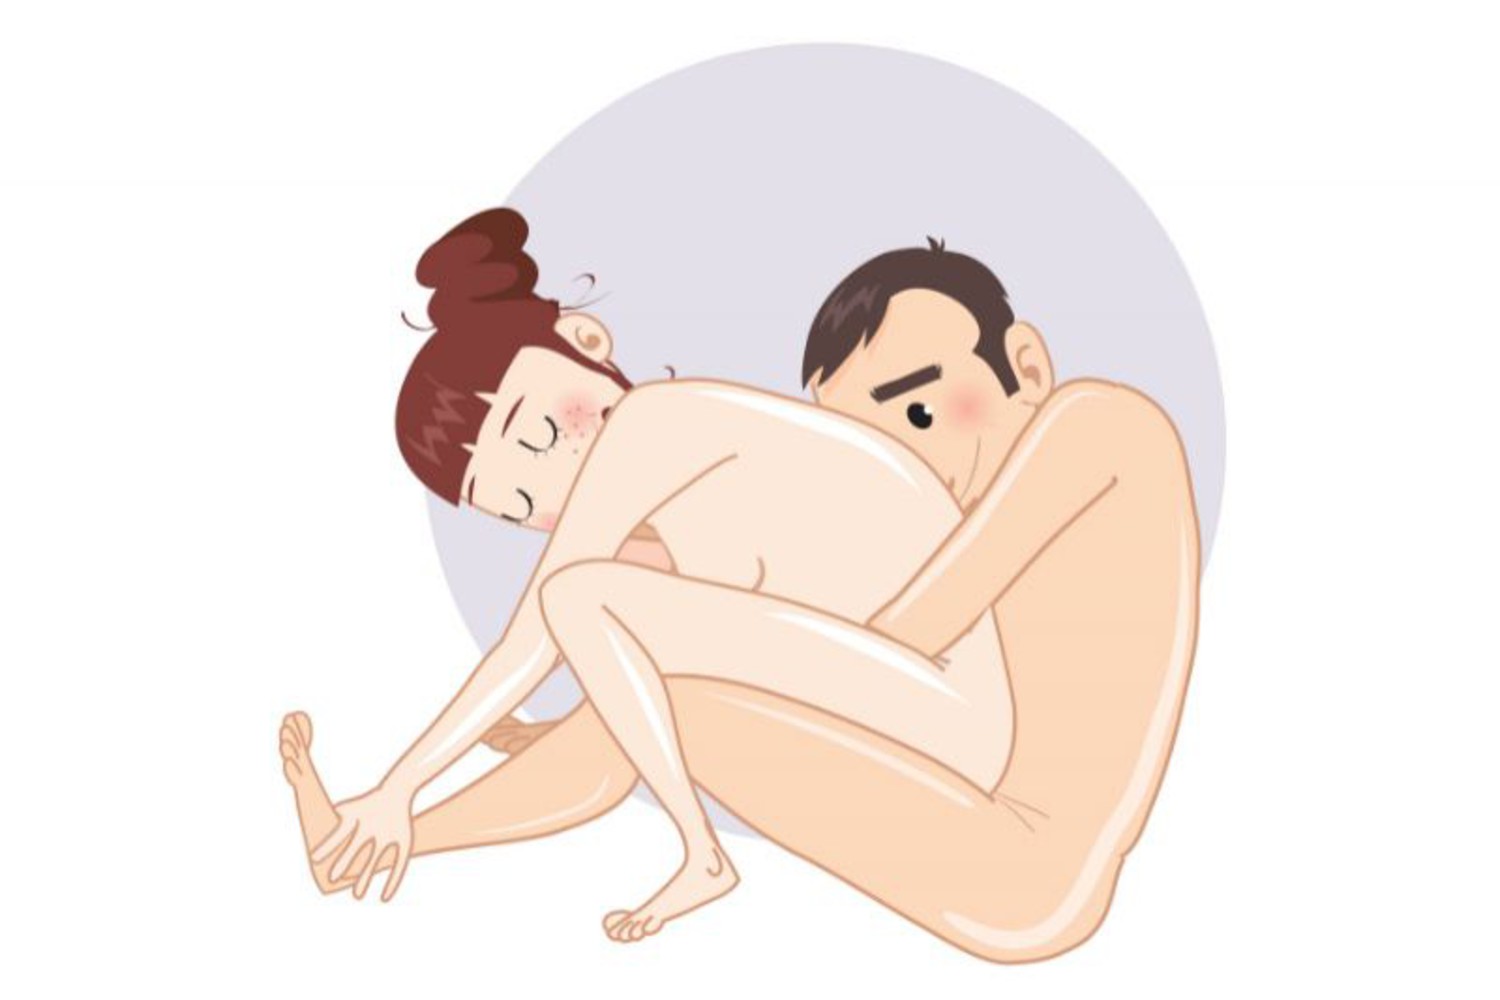 The Seated Ball Sex Position.